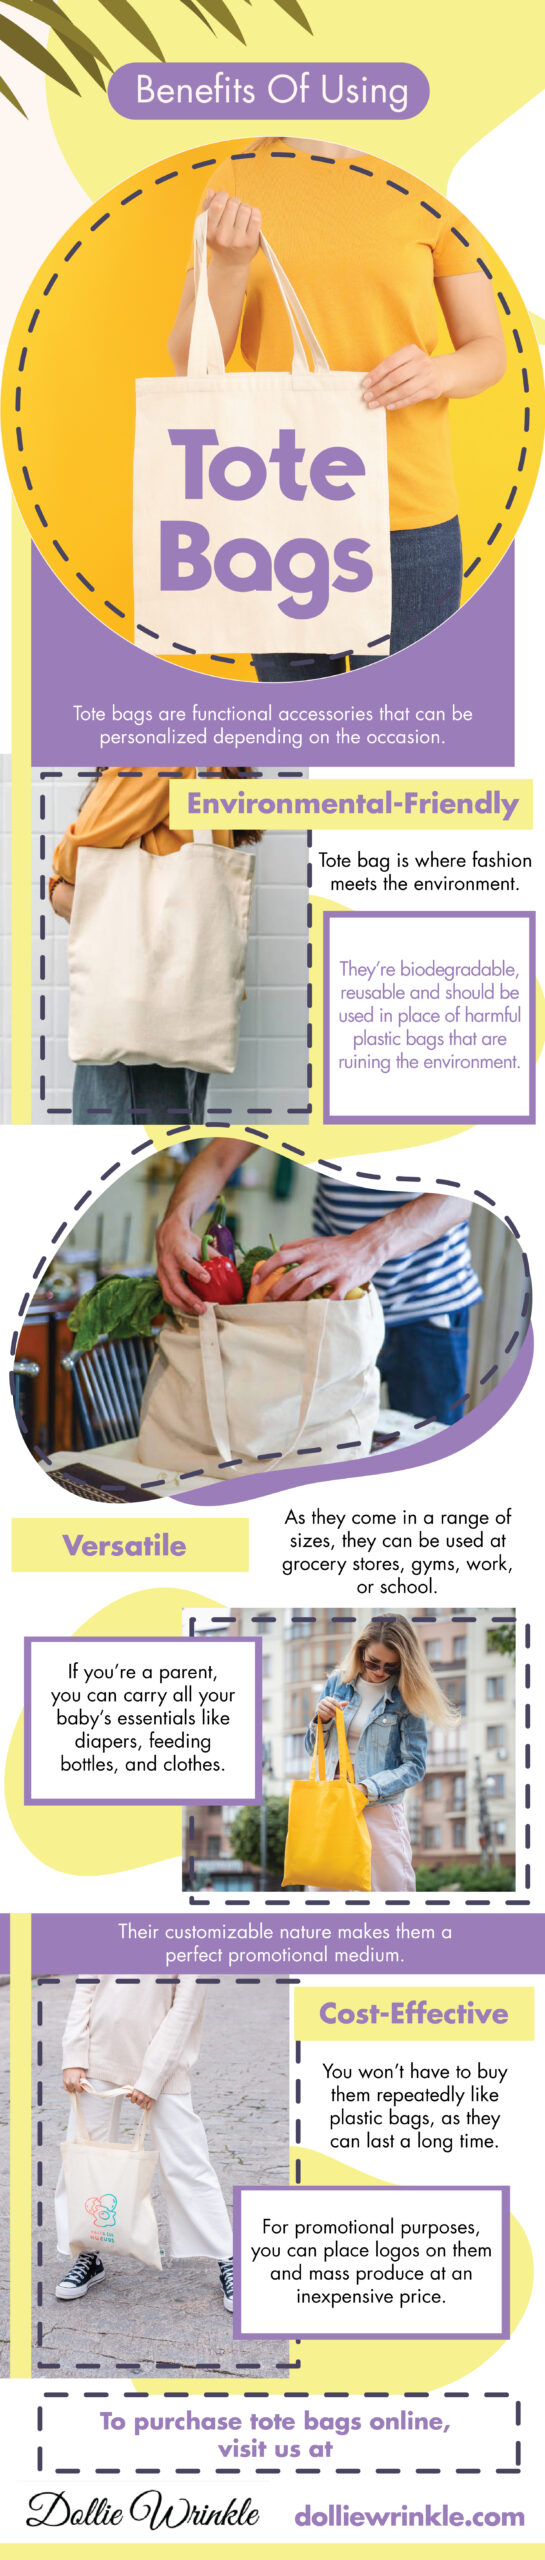 Benefits of Using Tote Bags